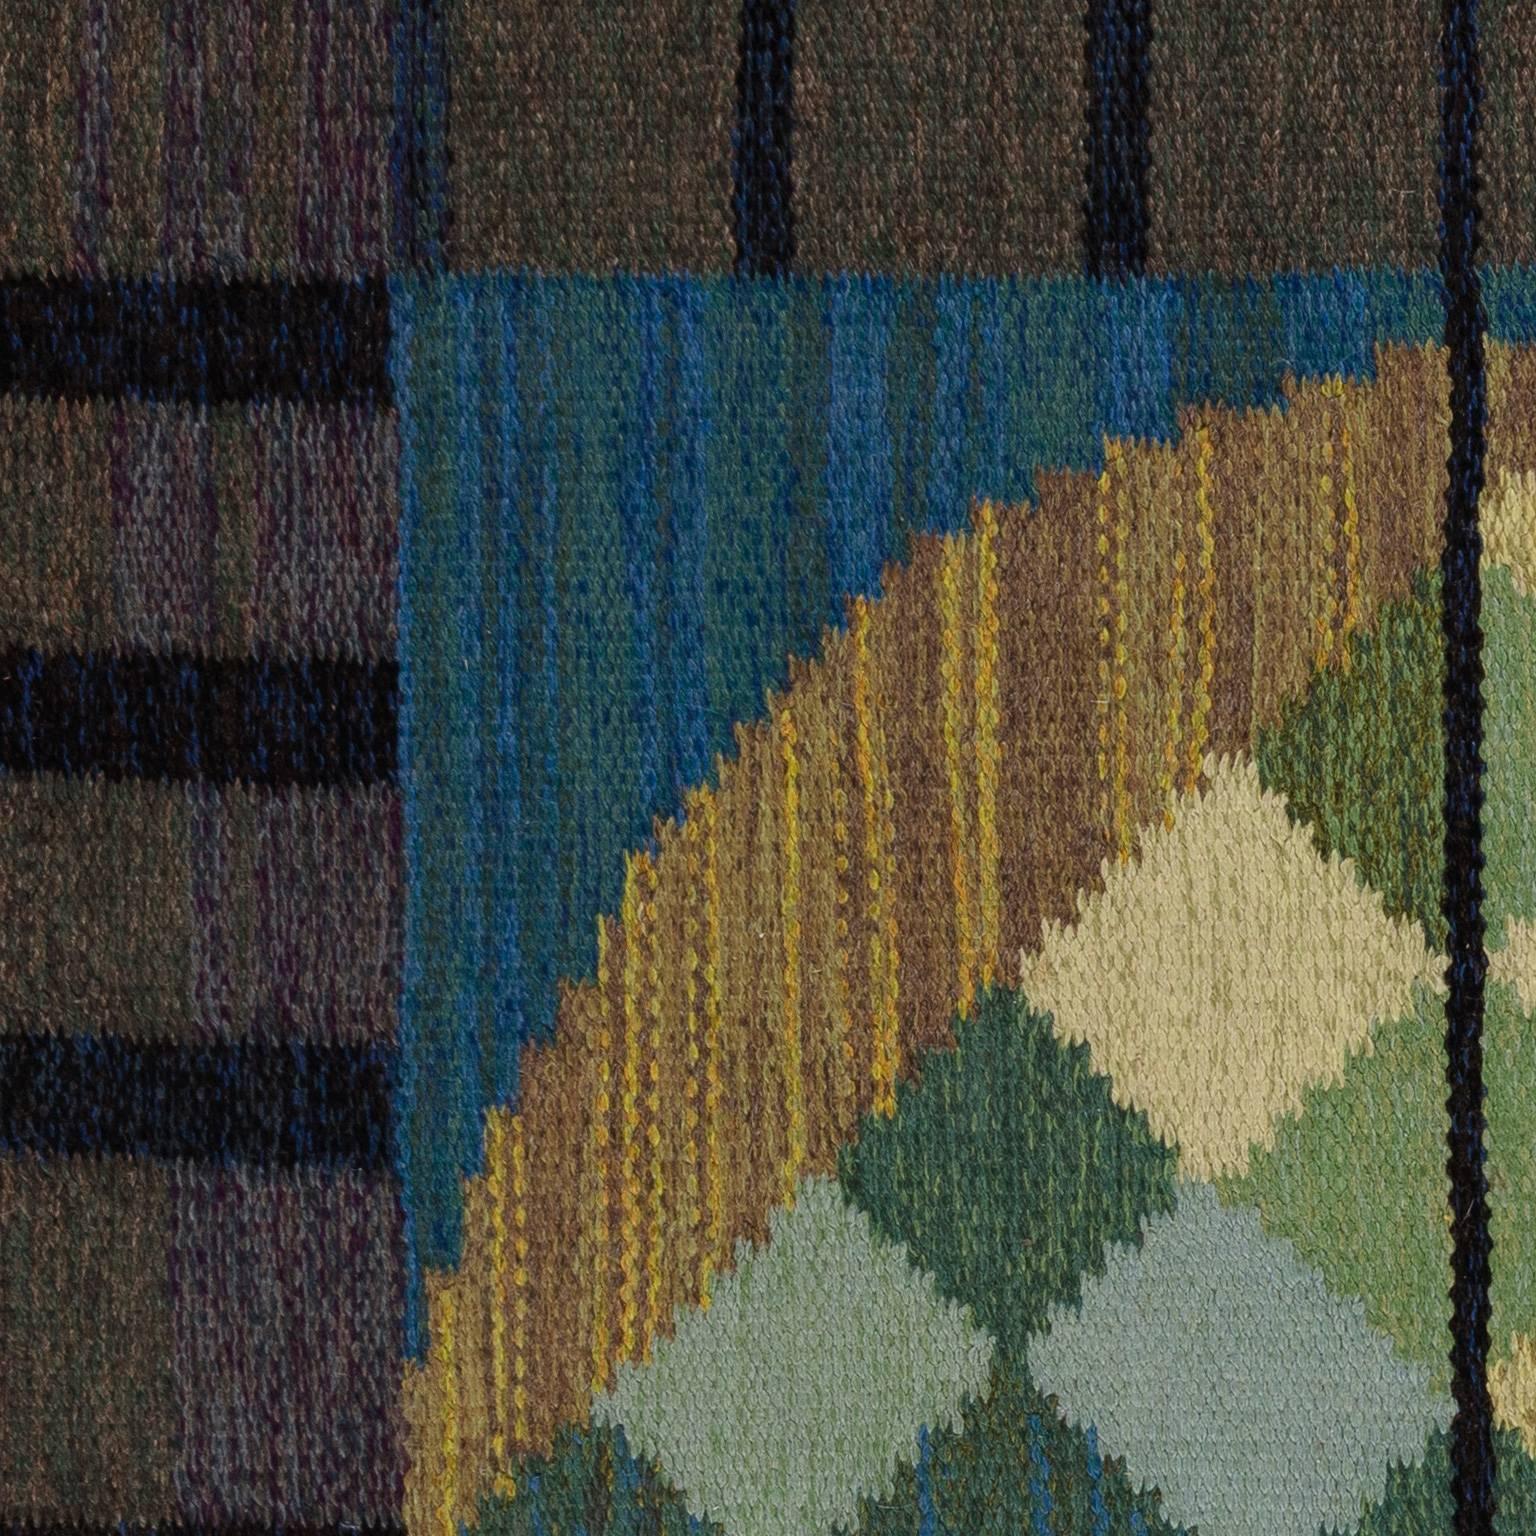 Unusual geometrical röllakan rug. Signed by both Inga-Mi Vannérus-Rydgran, and Jönköpings Läns Hemslöjd. The carpet should be great looking combined with furniture such as Finn Juhl, Hans Wegner and masterpiece made by Danish crafts.